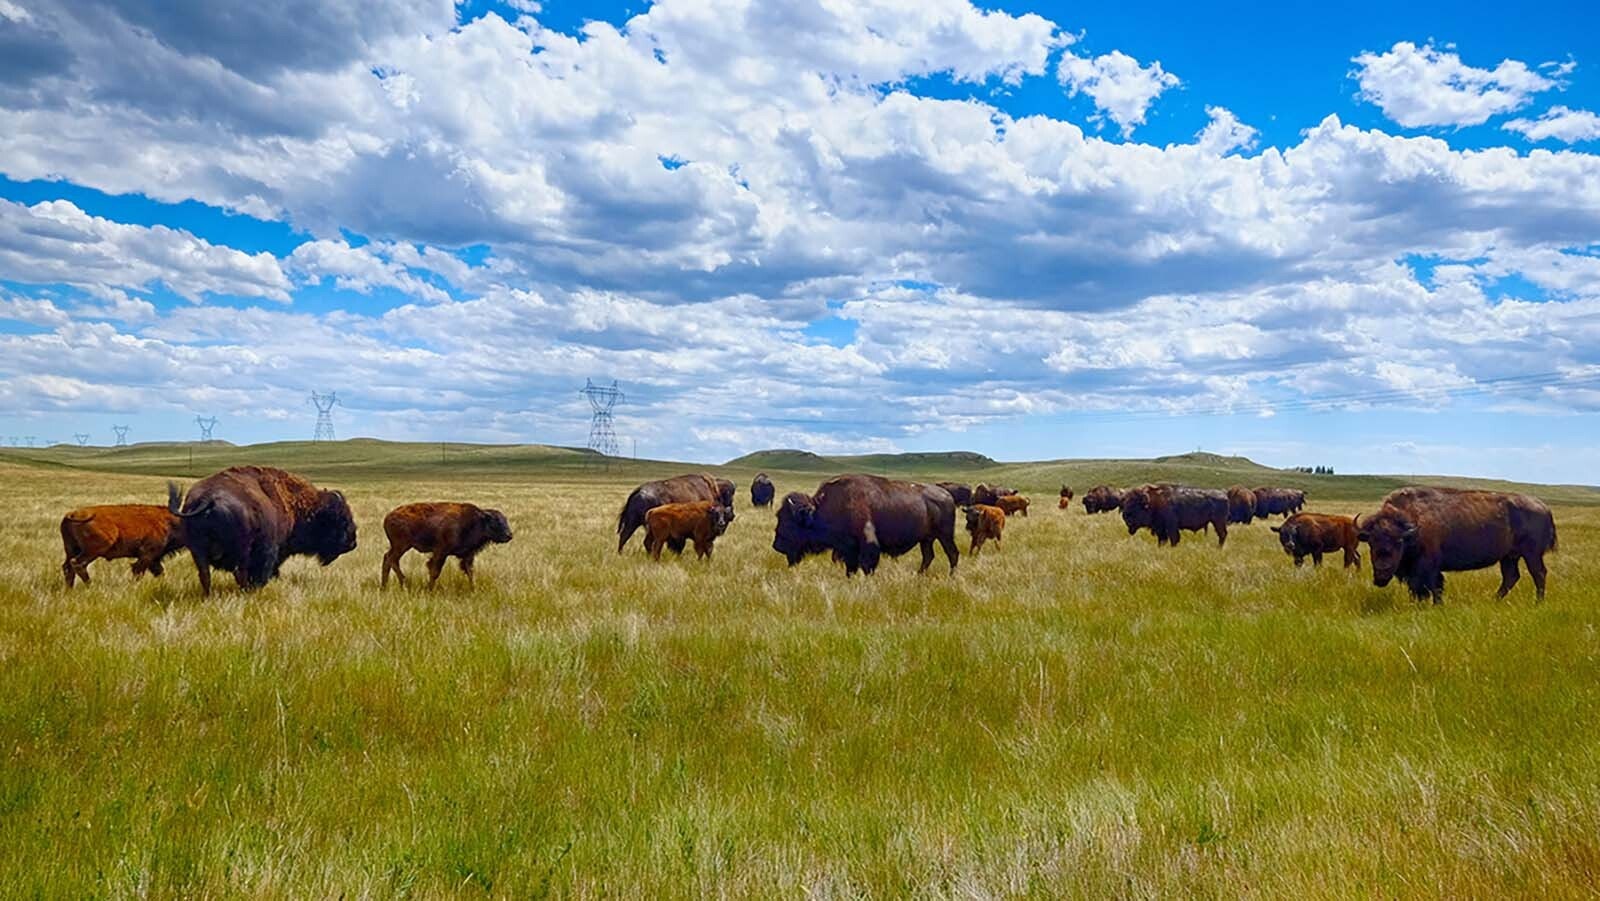 Officials in Montana, Wyoming and other places around the West are frustrated by a lack of information from the federal government about plans to reintroduce wild bison.